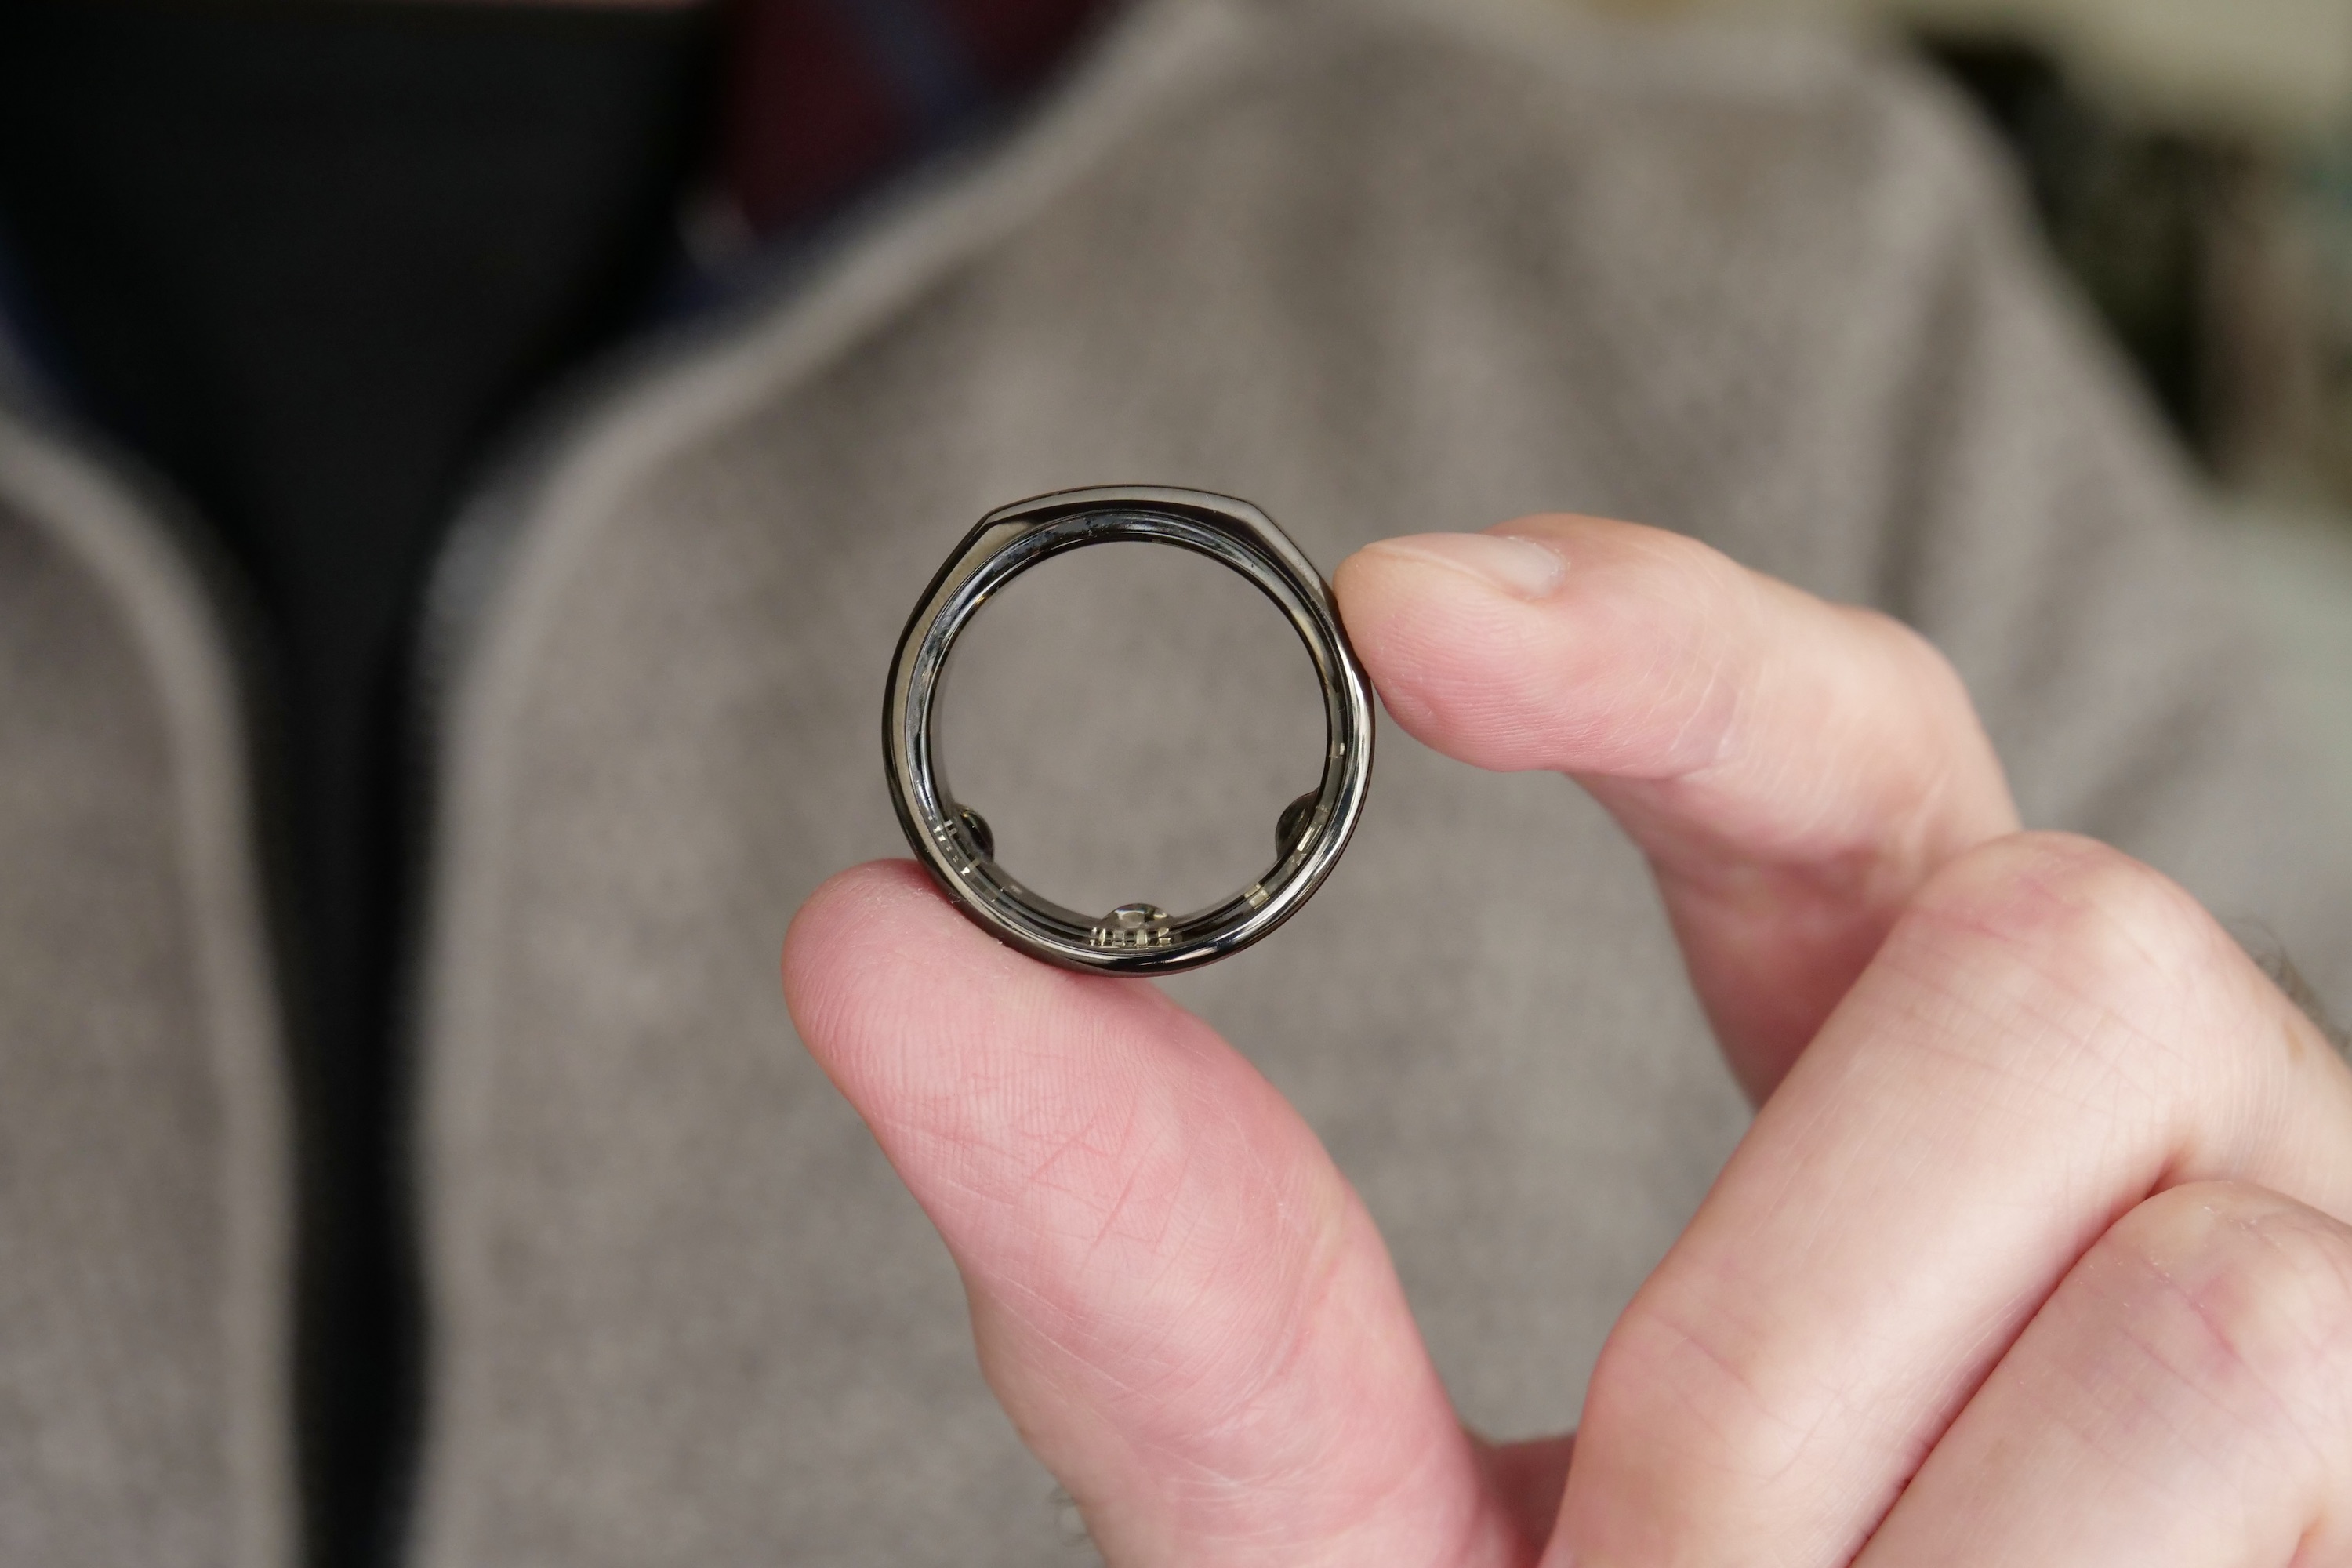 Should you put a ring on it? I tried the Oura 3 for one month to find out.